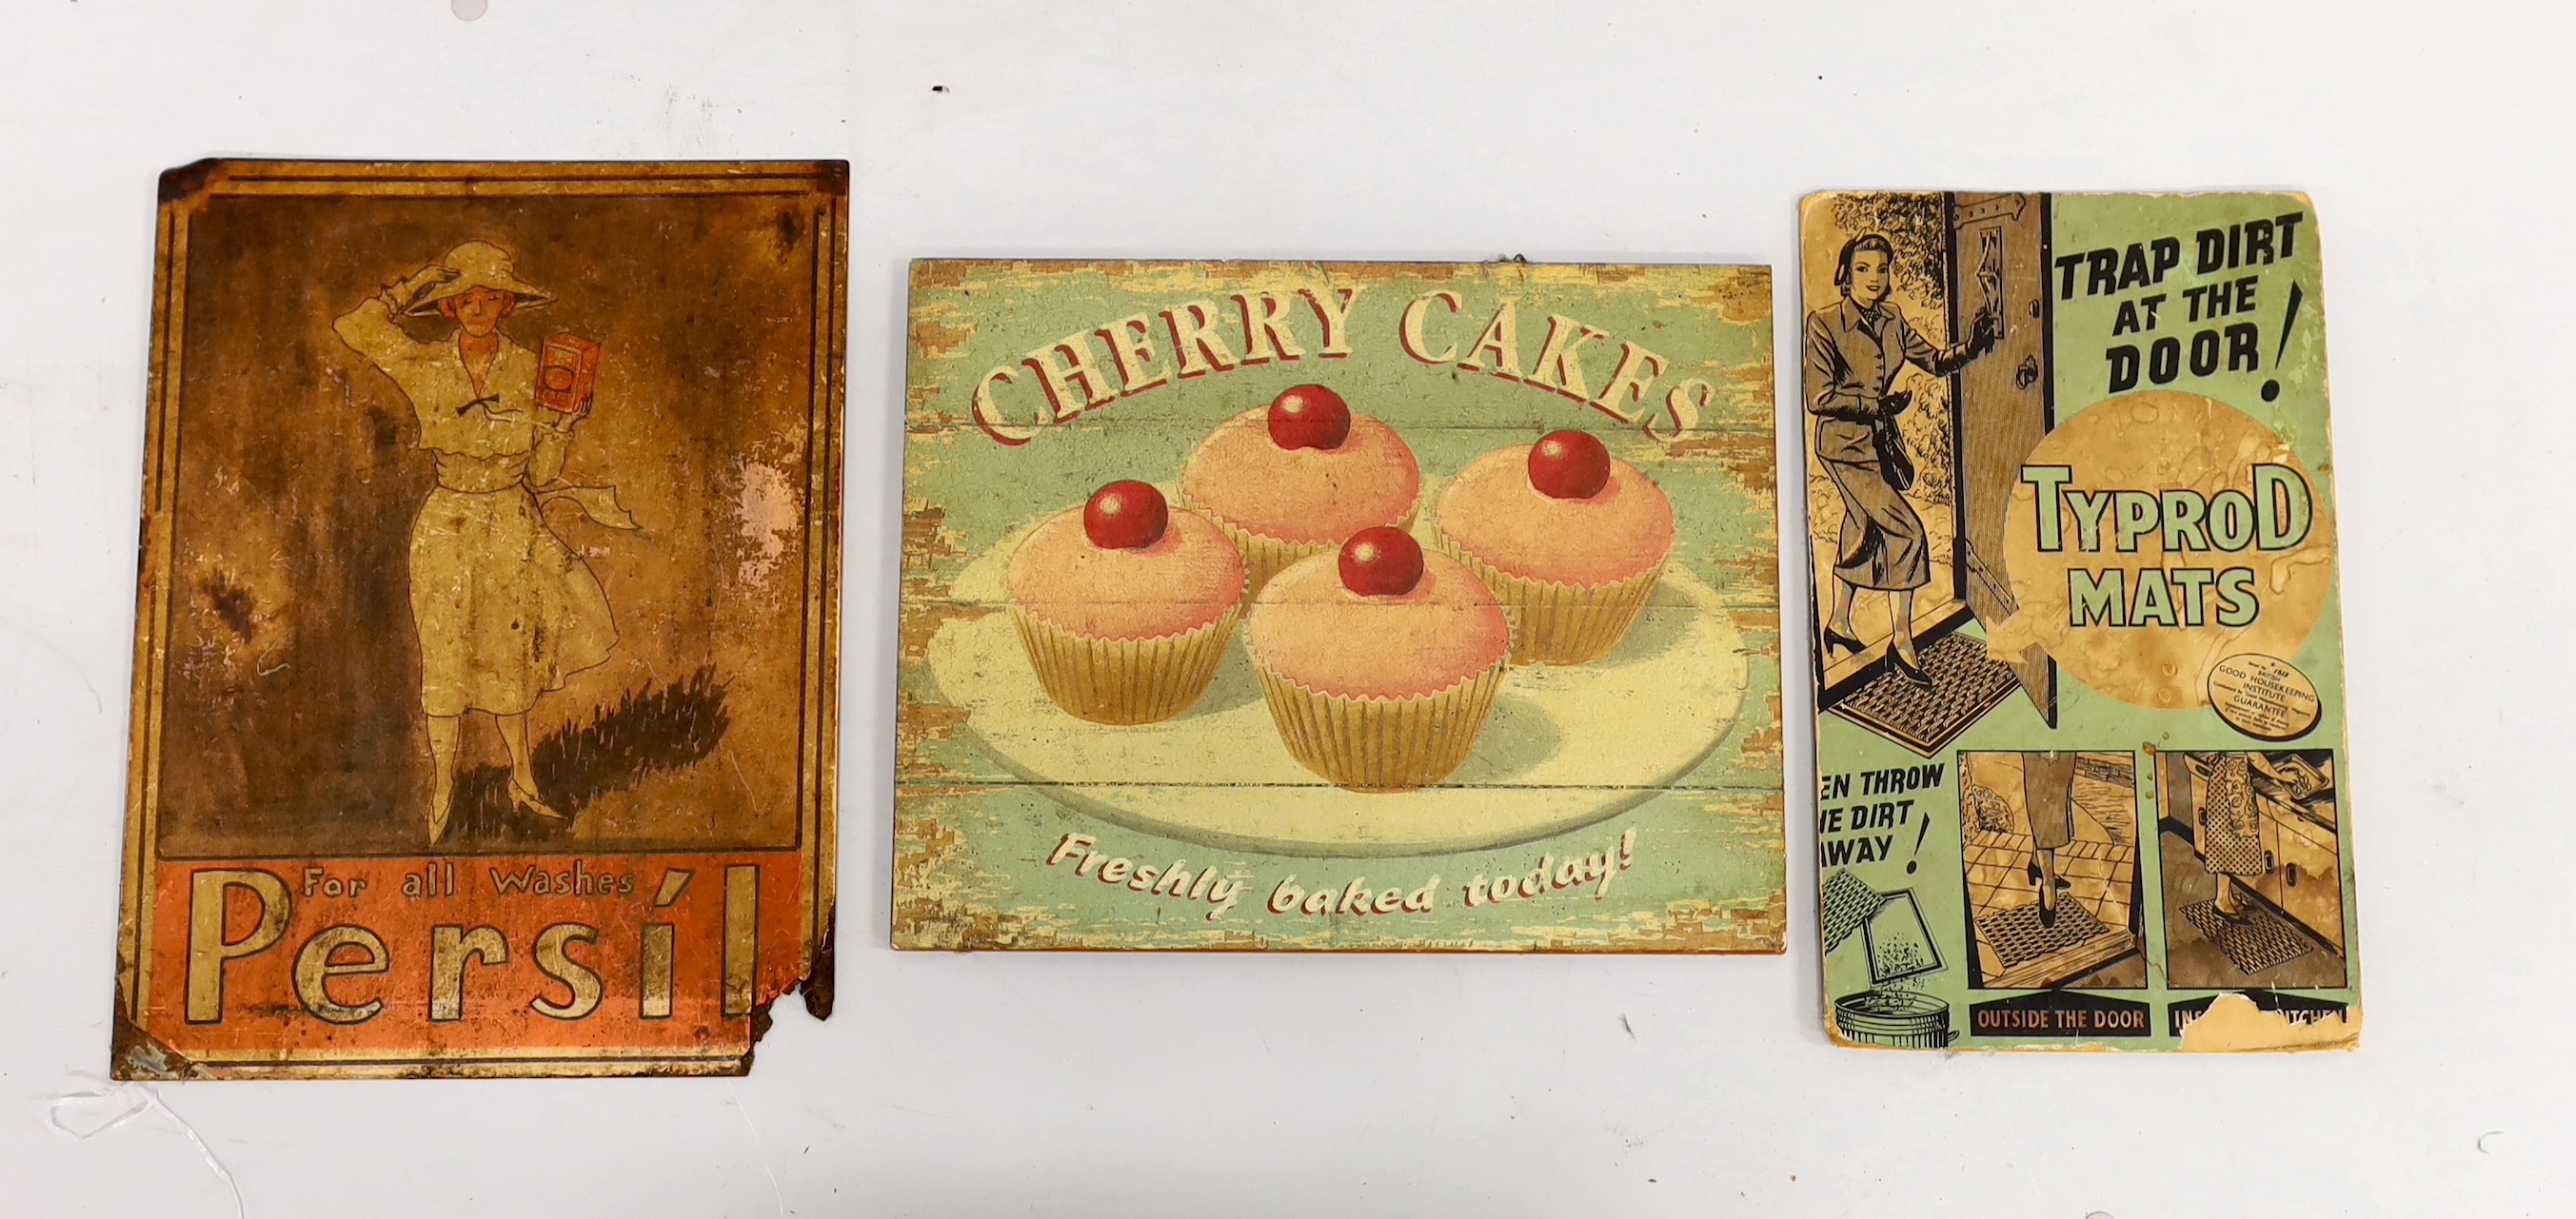 A vintage style 'Cherry Cakes' advertising sign, width 38cm, height 30cm, Typrod Mats car sign and one other